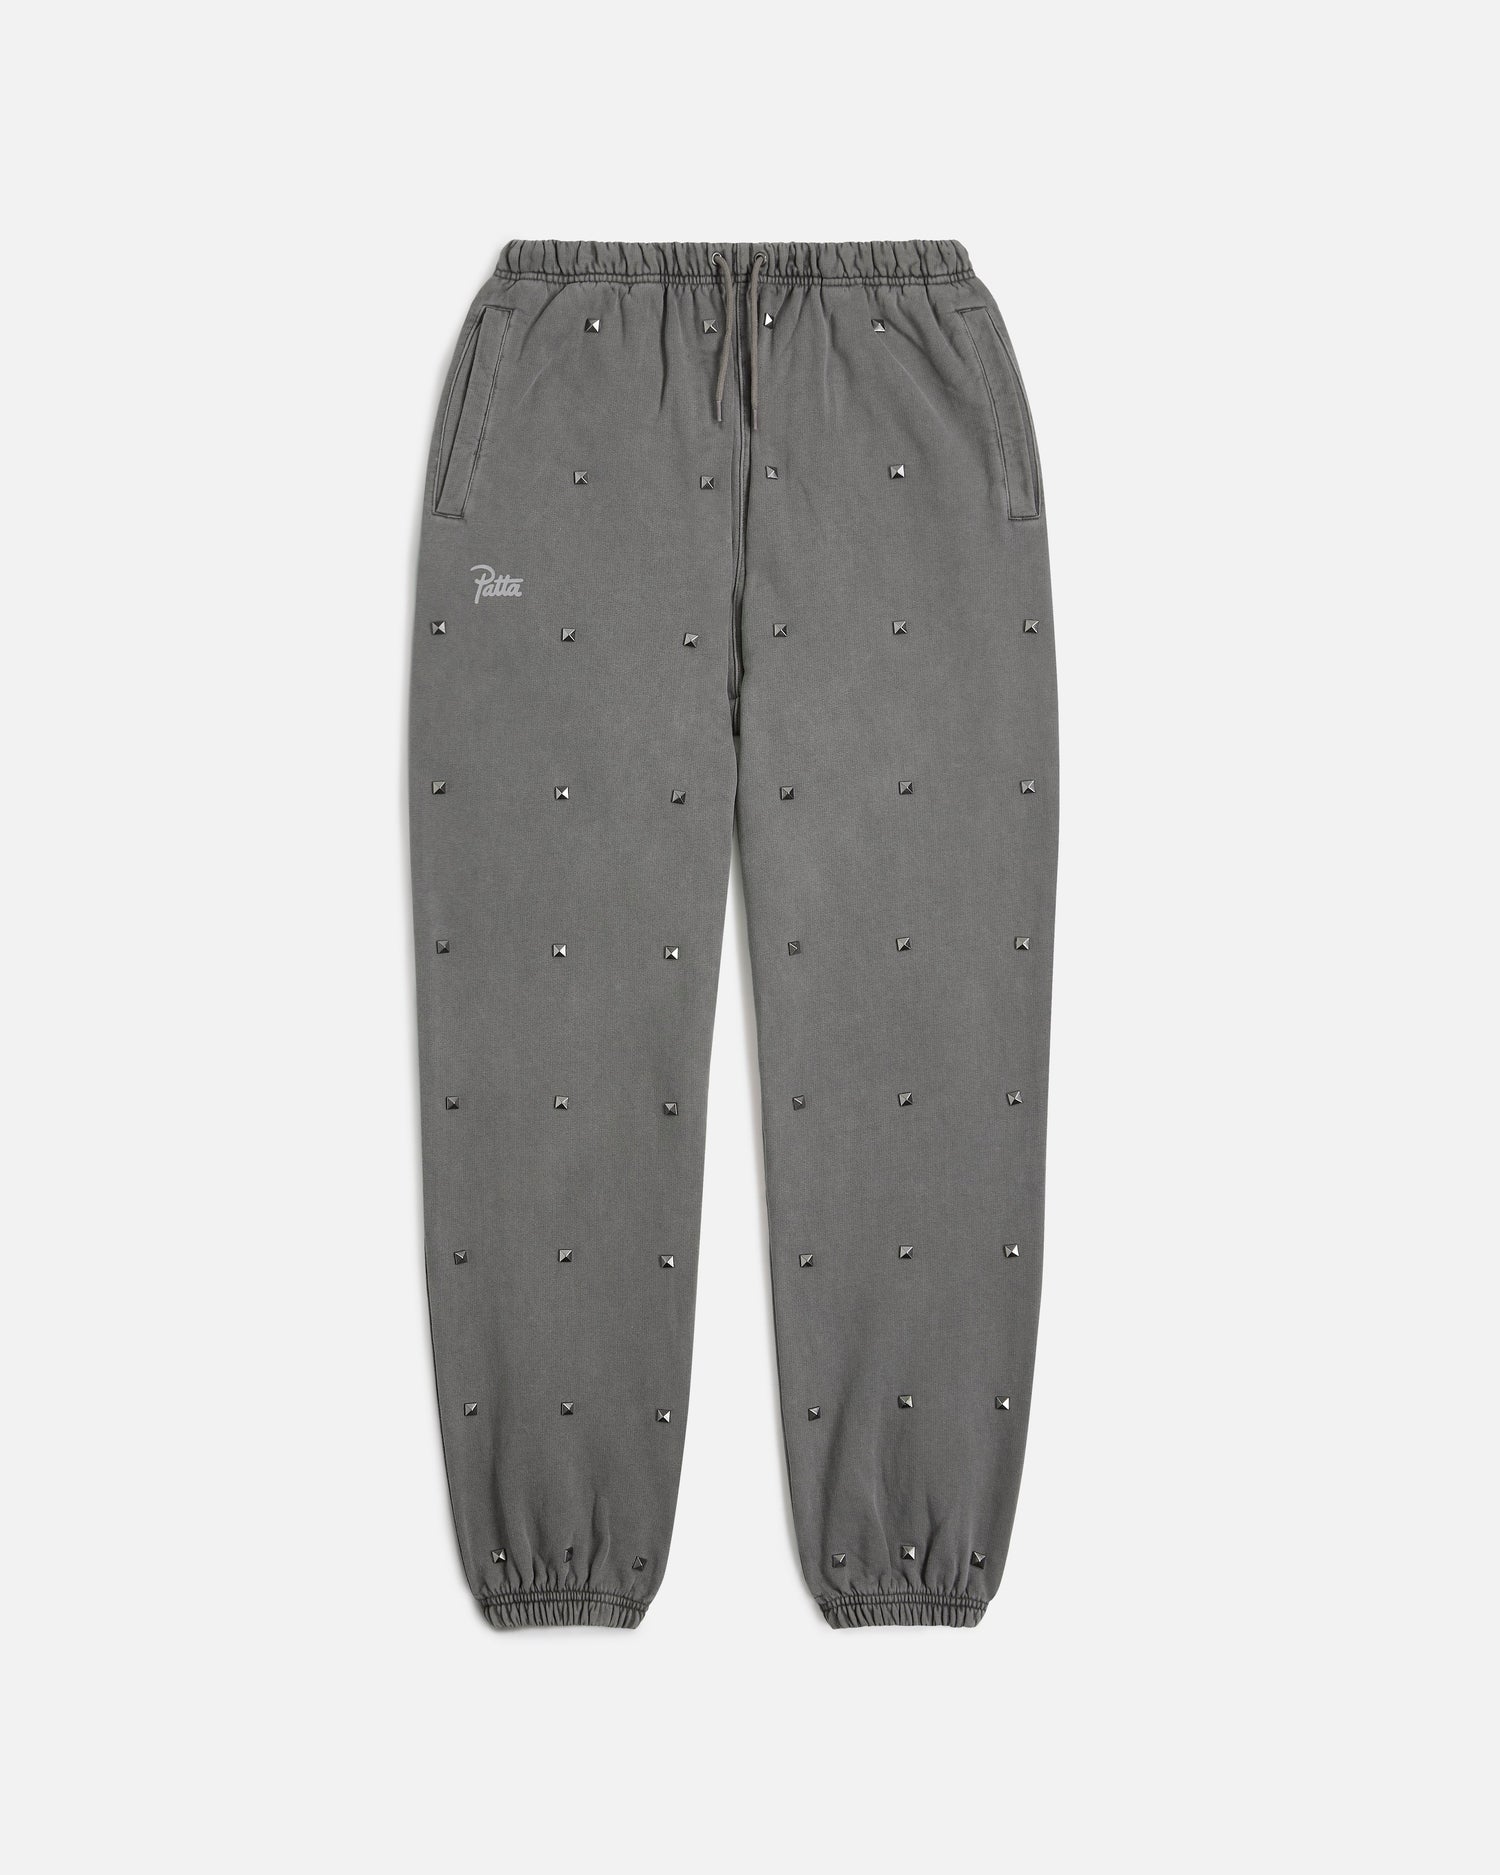 Patta Studded Washed Jogging Pants (Volcanic Glass)